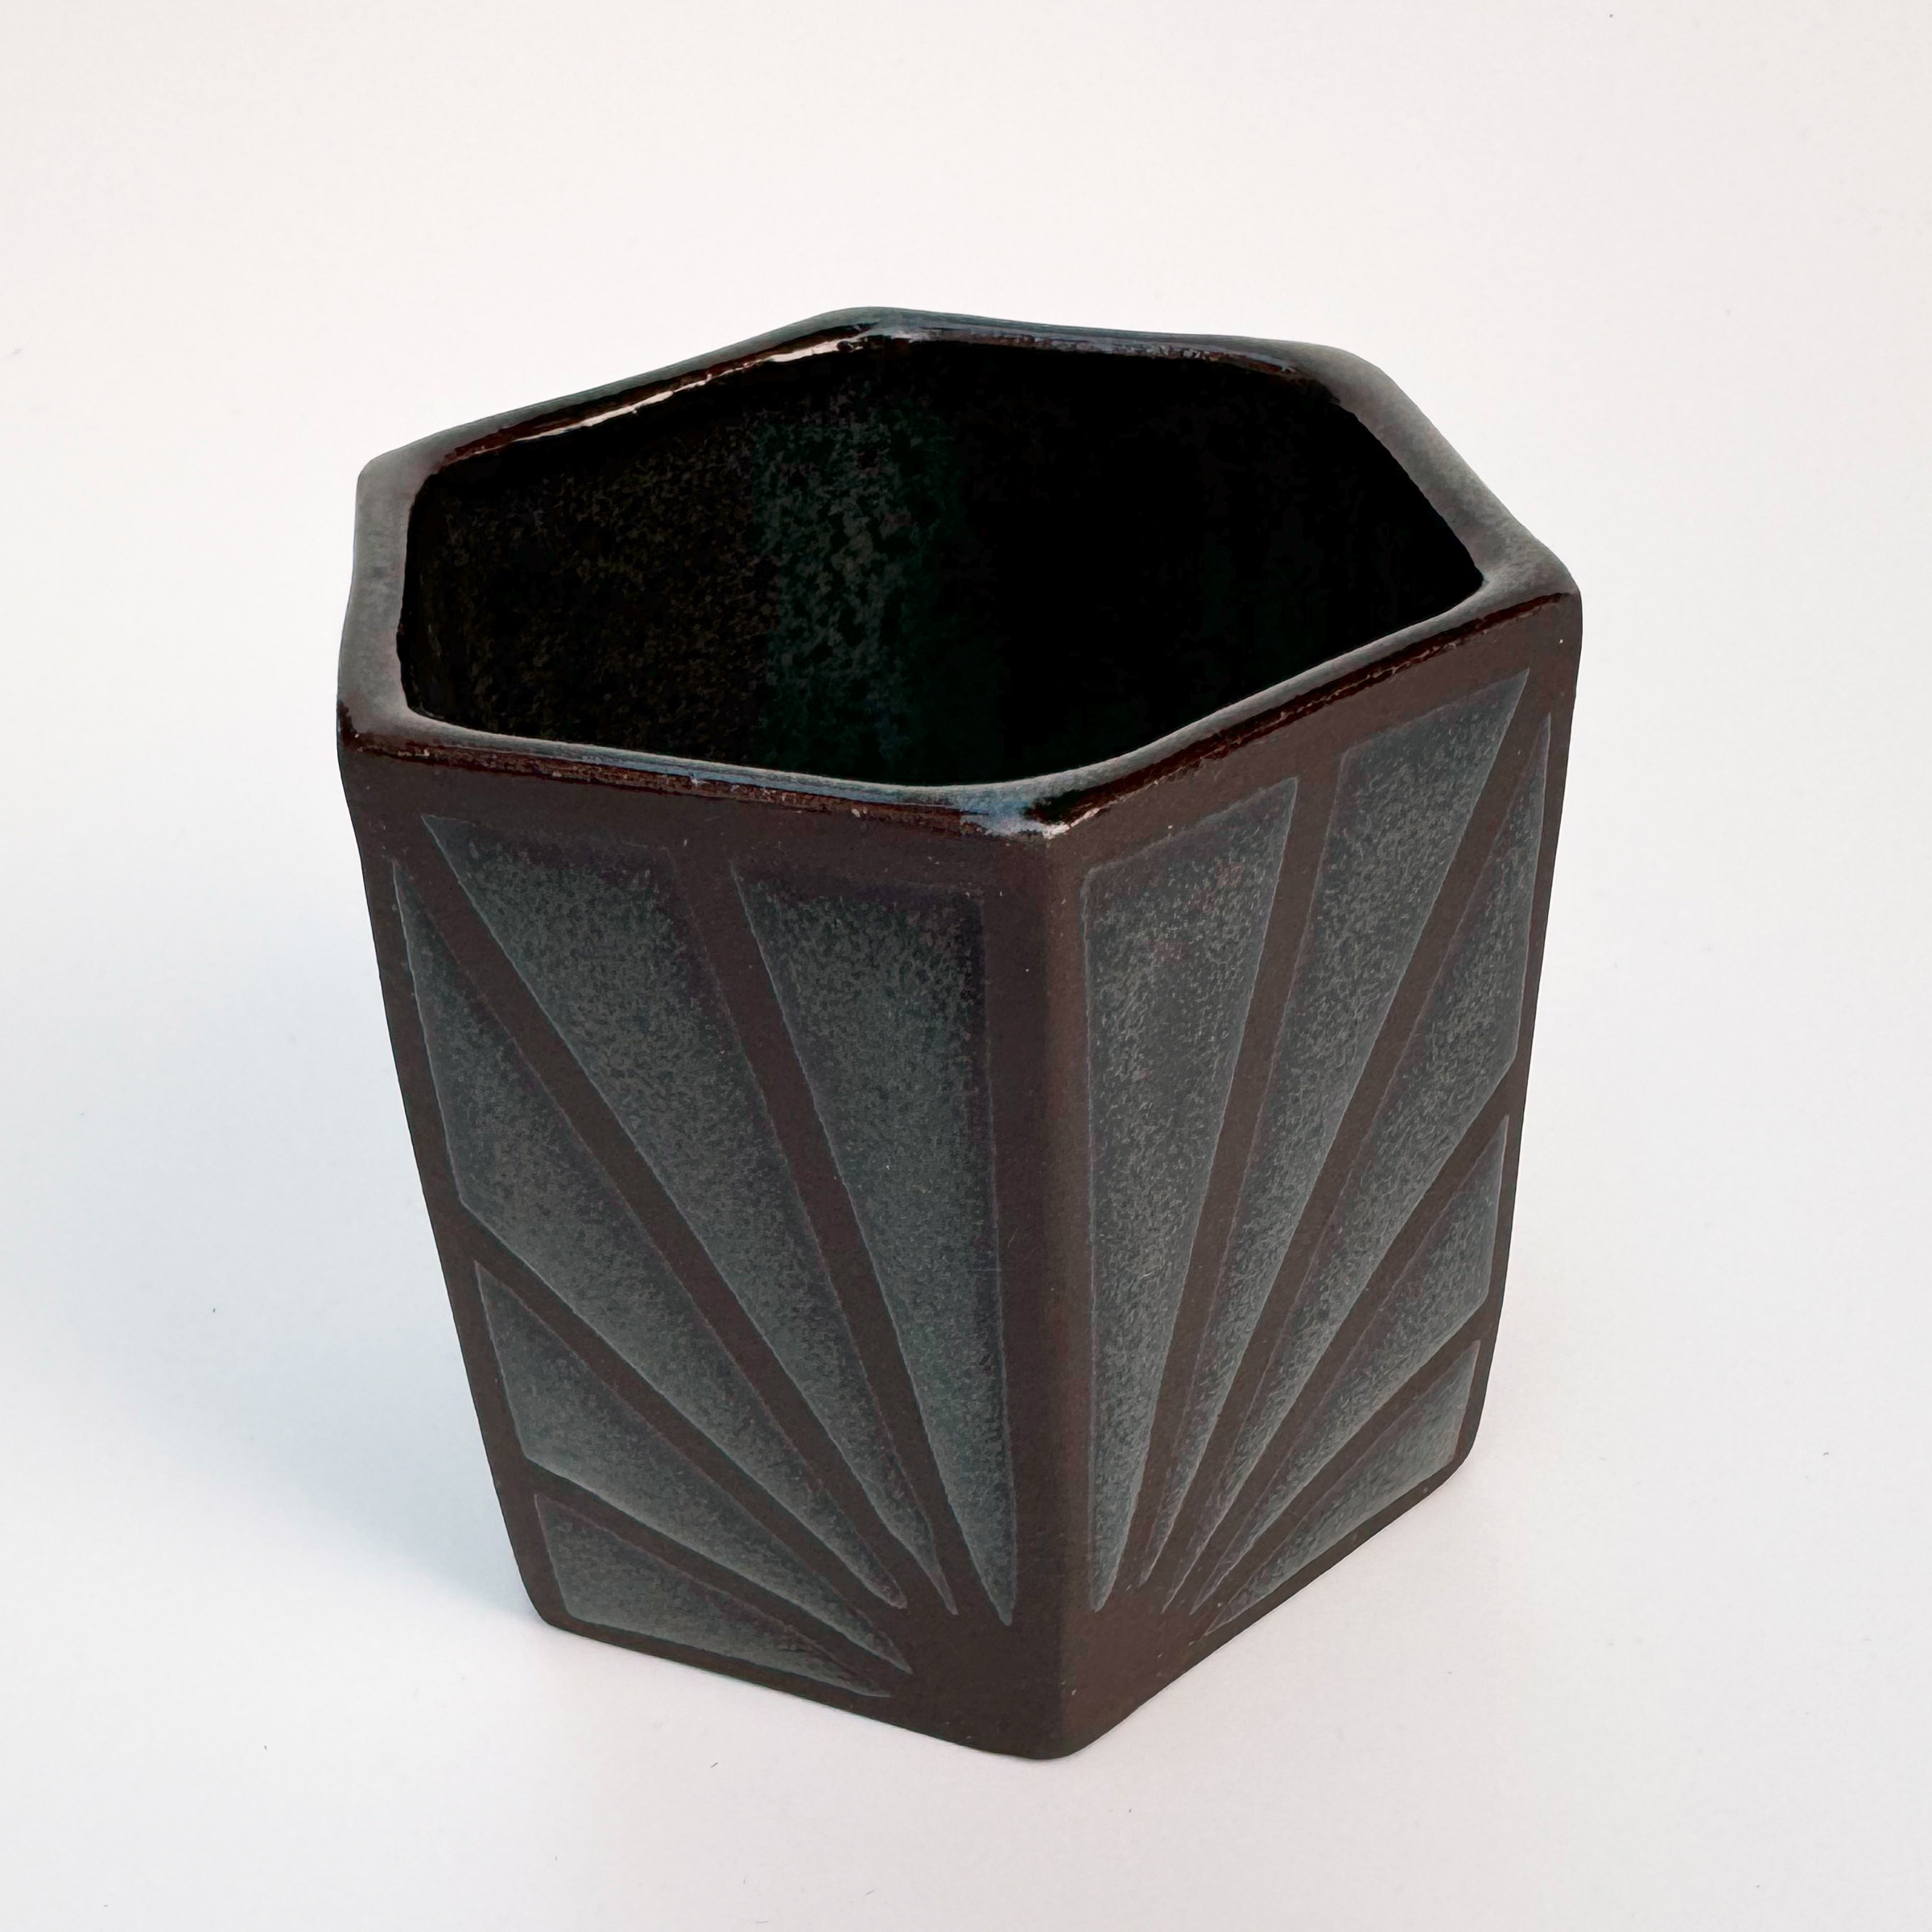 The glaze has a dark teal base, and speckles of blues, both light and navy, float in each section of glaze.